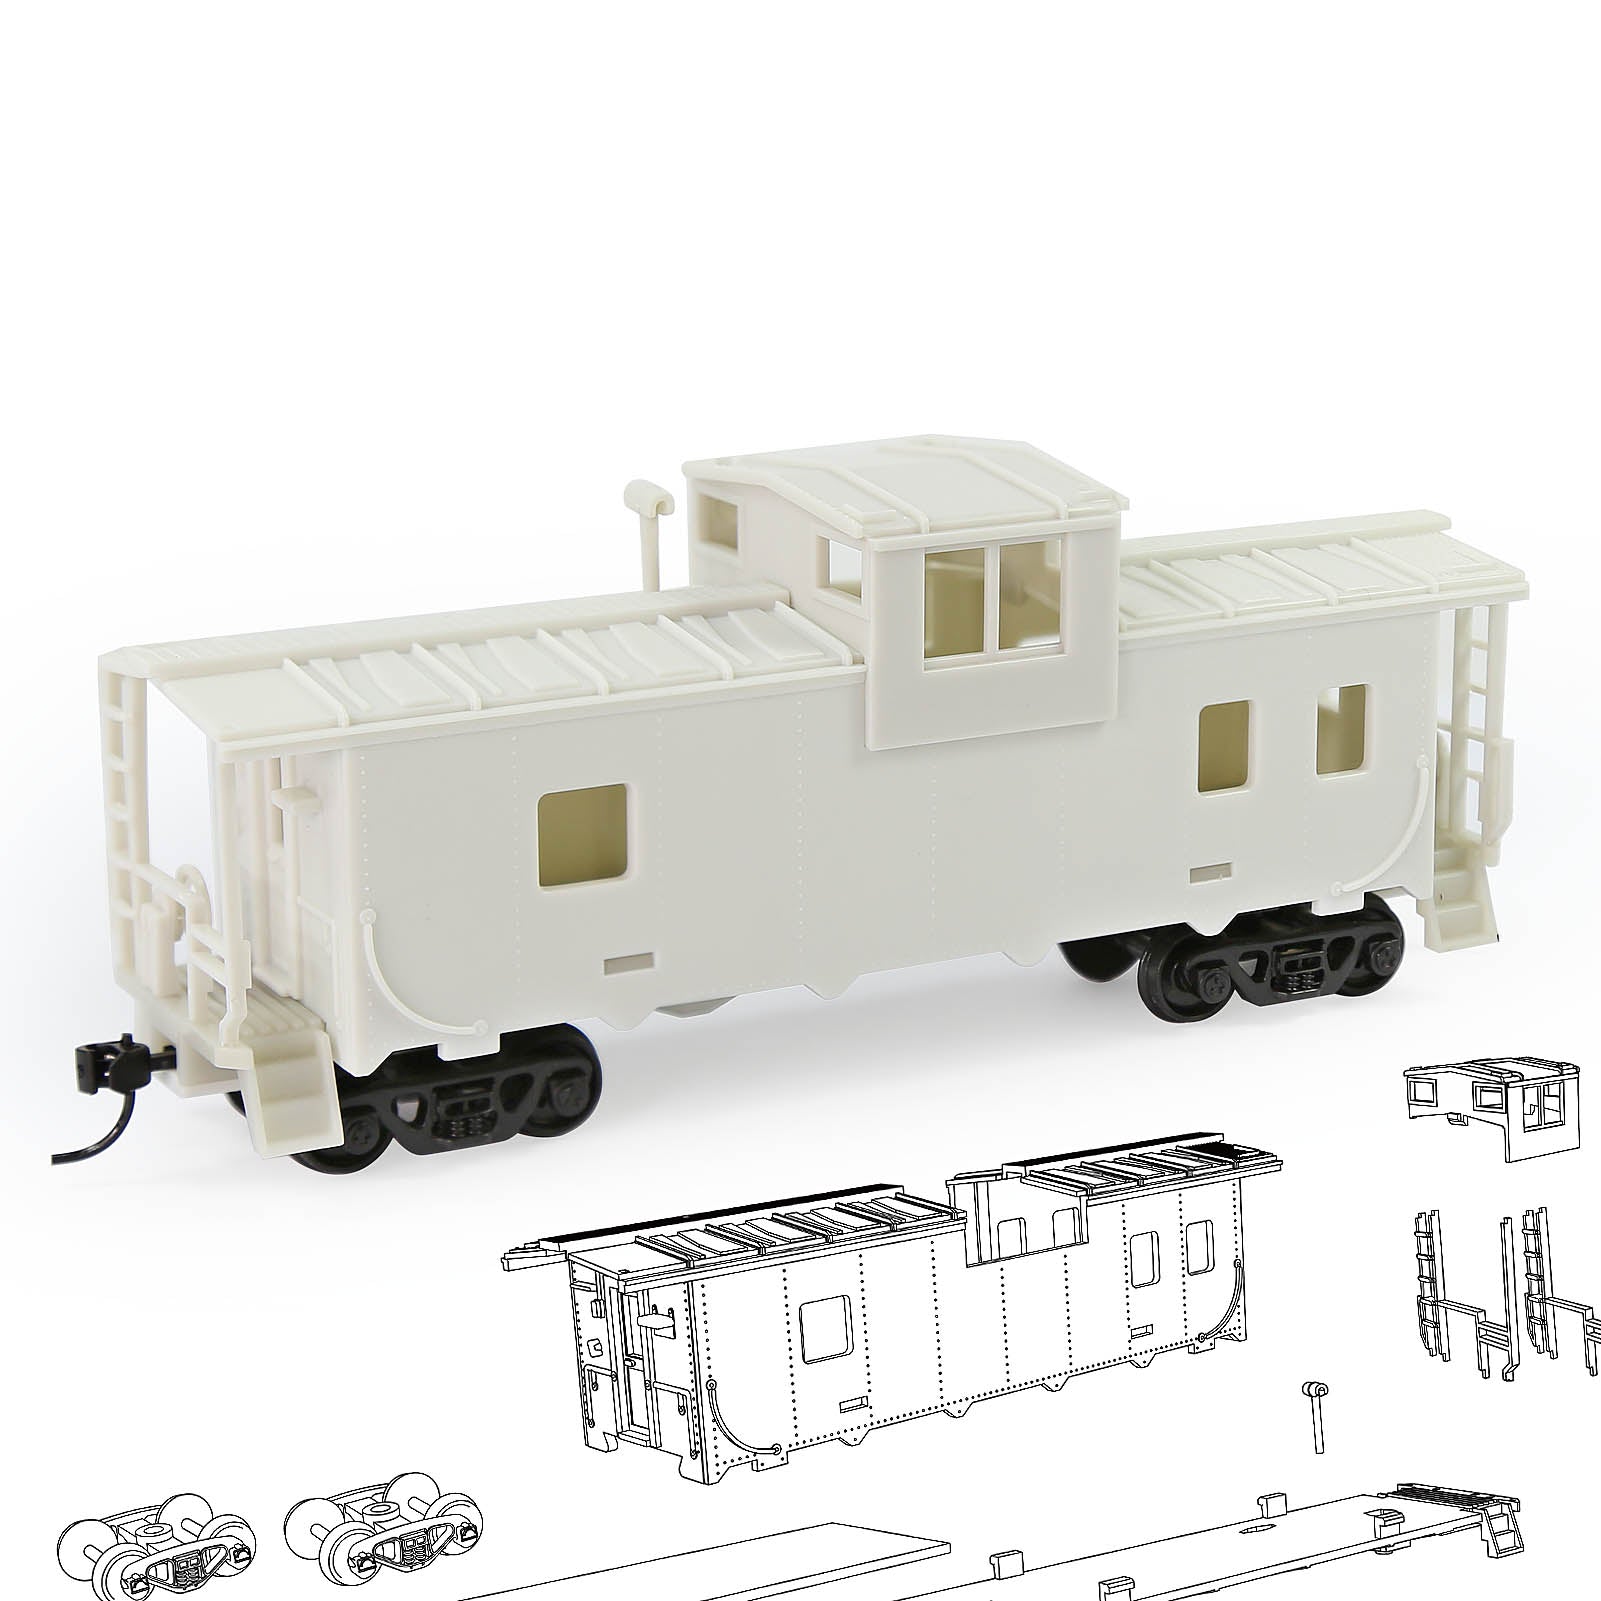 C8763JJ 1pc HO Scale 1:87 Blank Unpainted Unassembled 36' Wide Vision Caboose